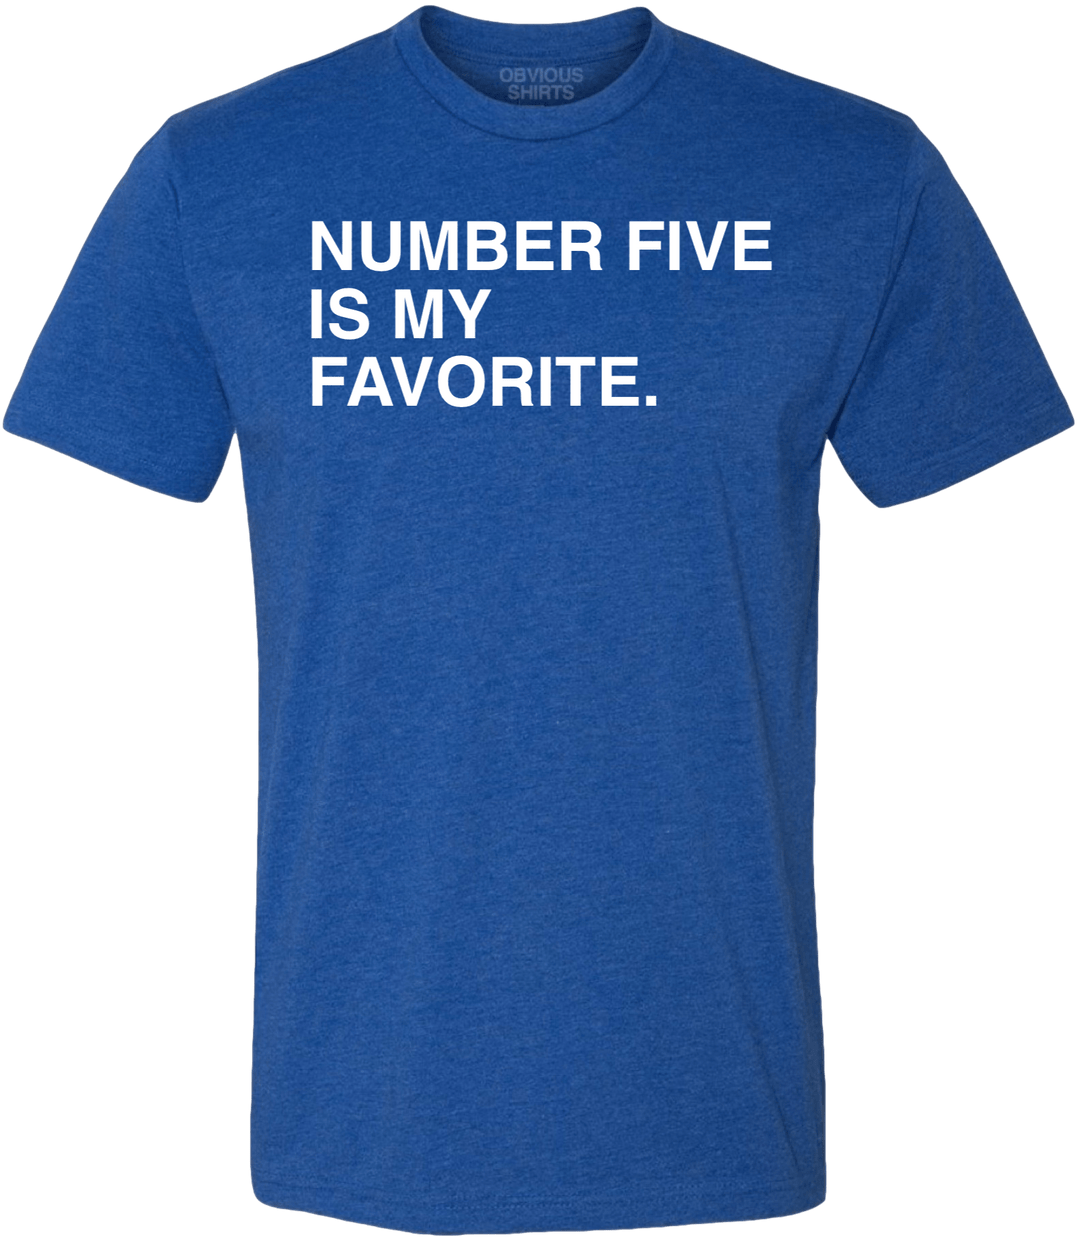 NUMBER 5 IS MY FAVORITE. - OBVIOUS SHIRTS